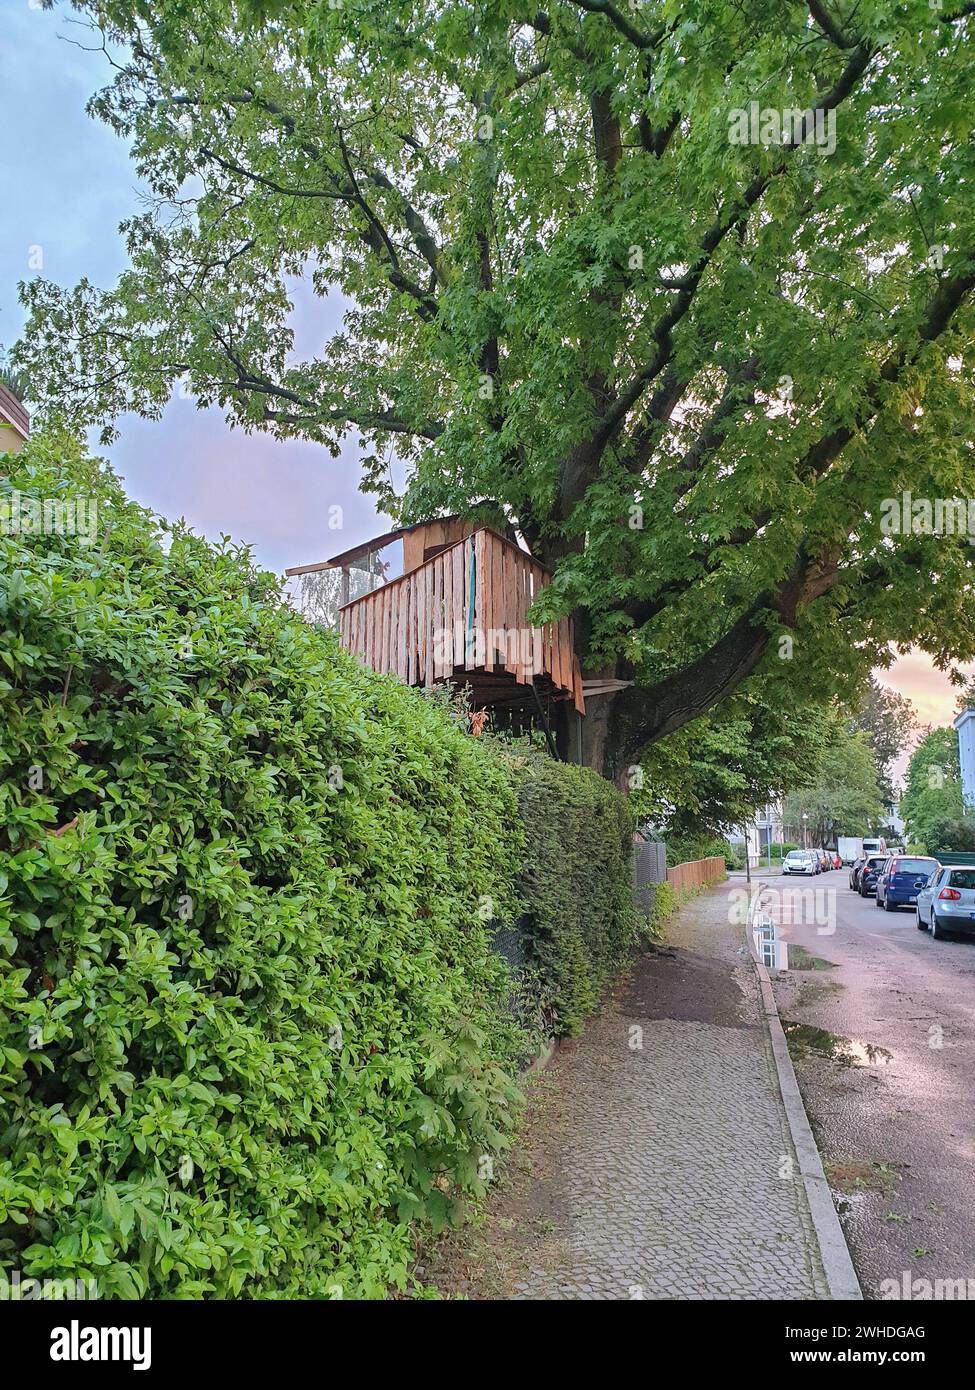 View from the public road to a tree house in a tree, Berlin, Germany Stock Photo